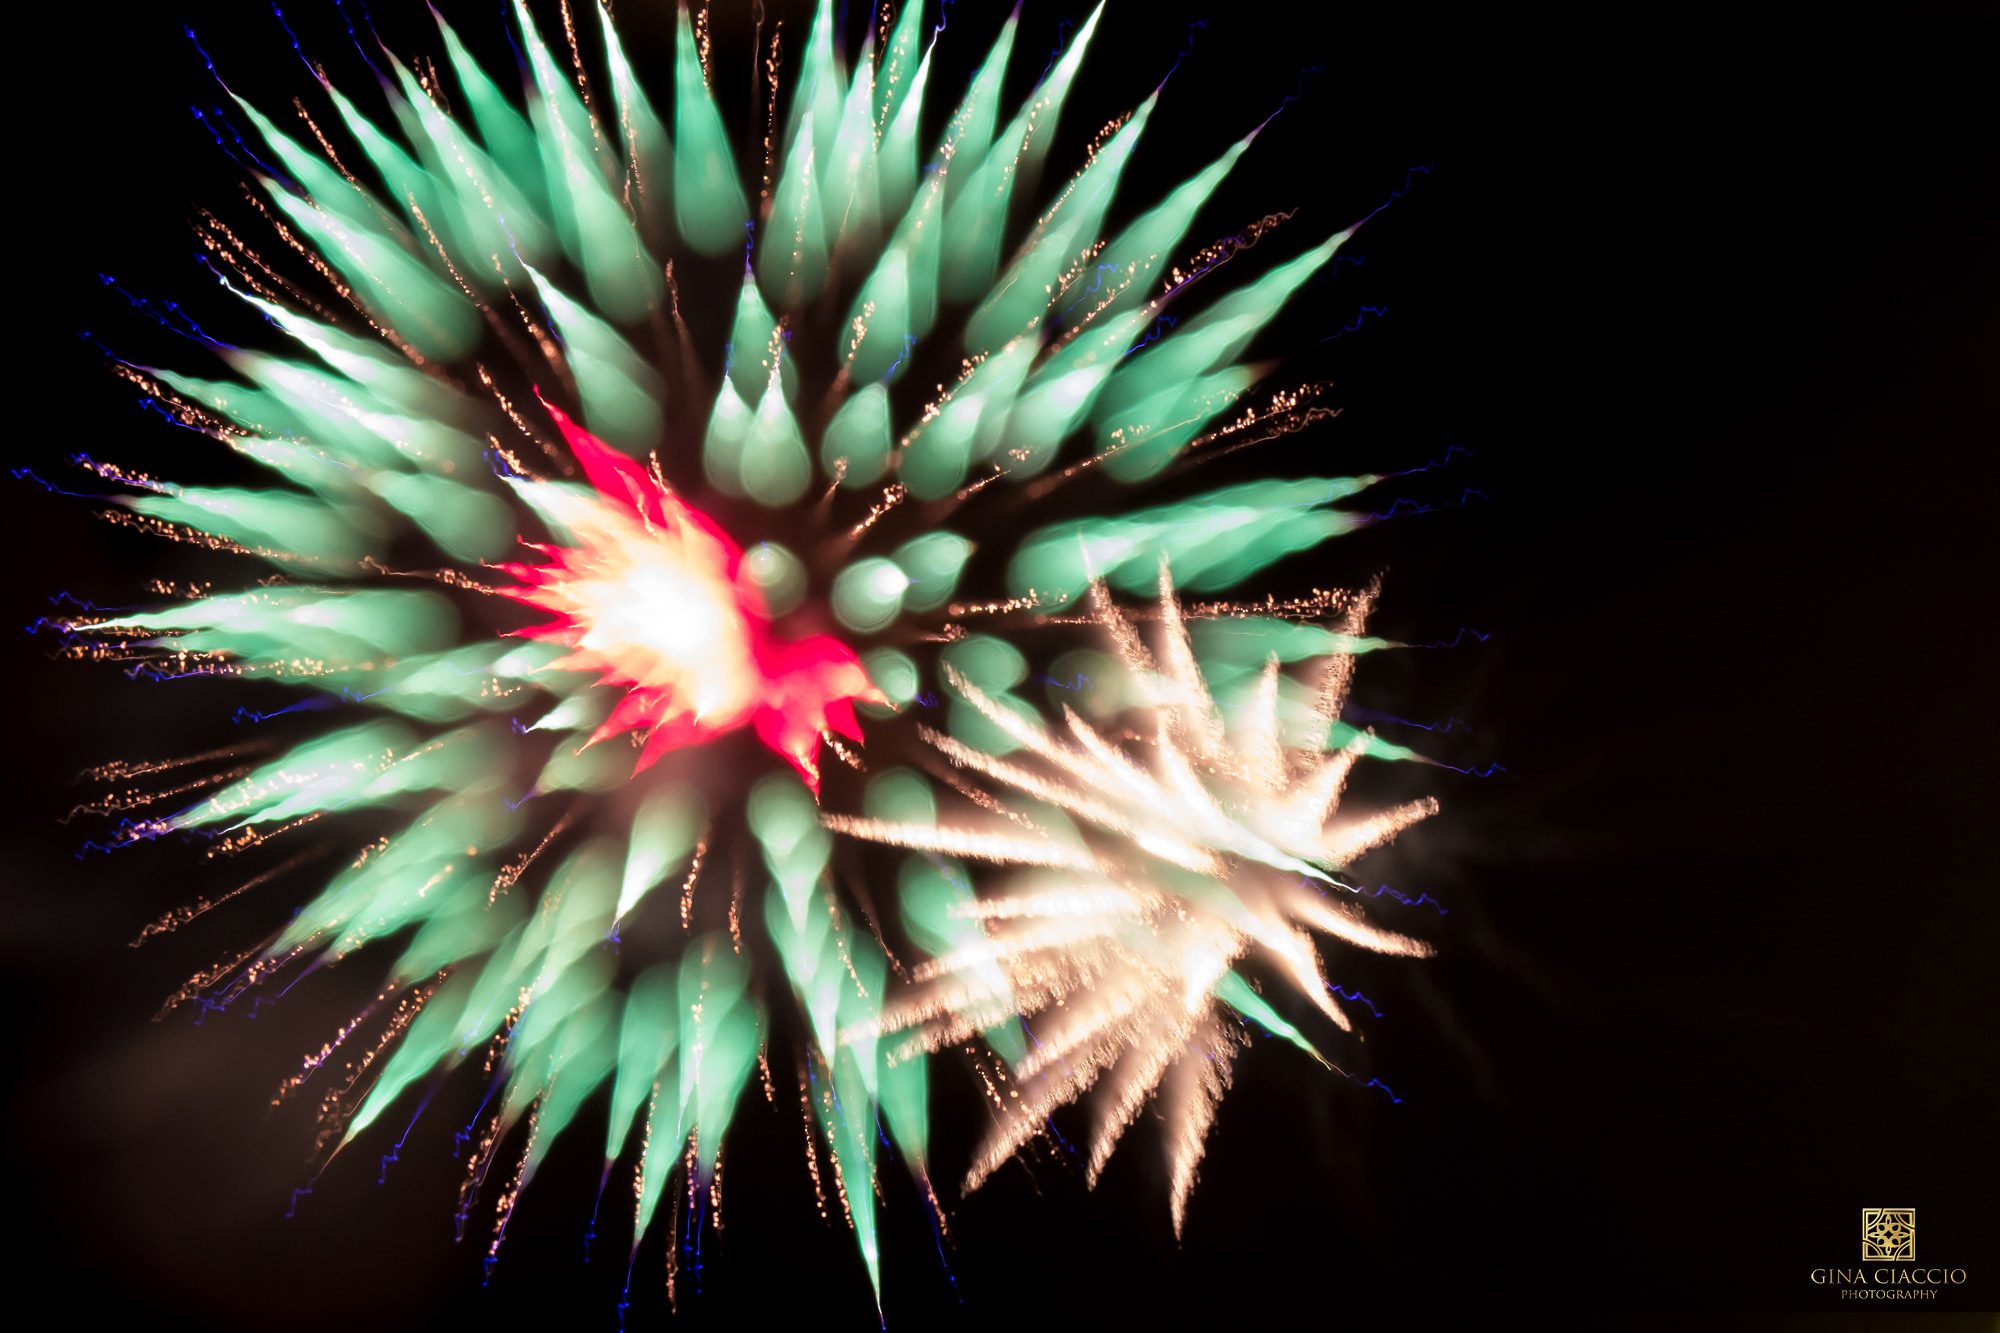 Green Fireworks that look like flowers by El Paso photographer Gina Ciaccio